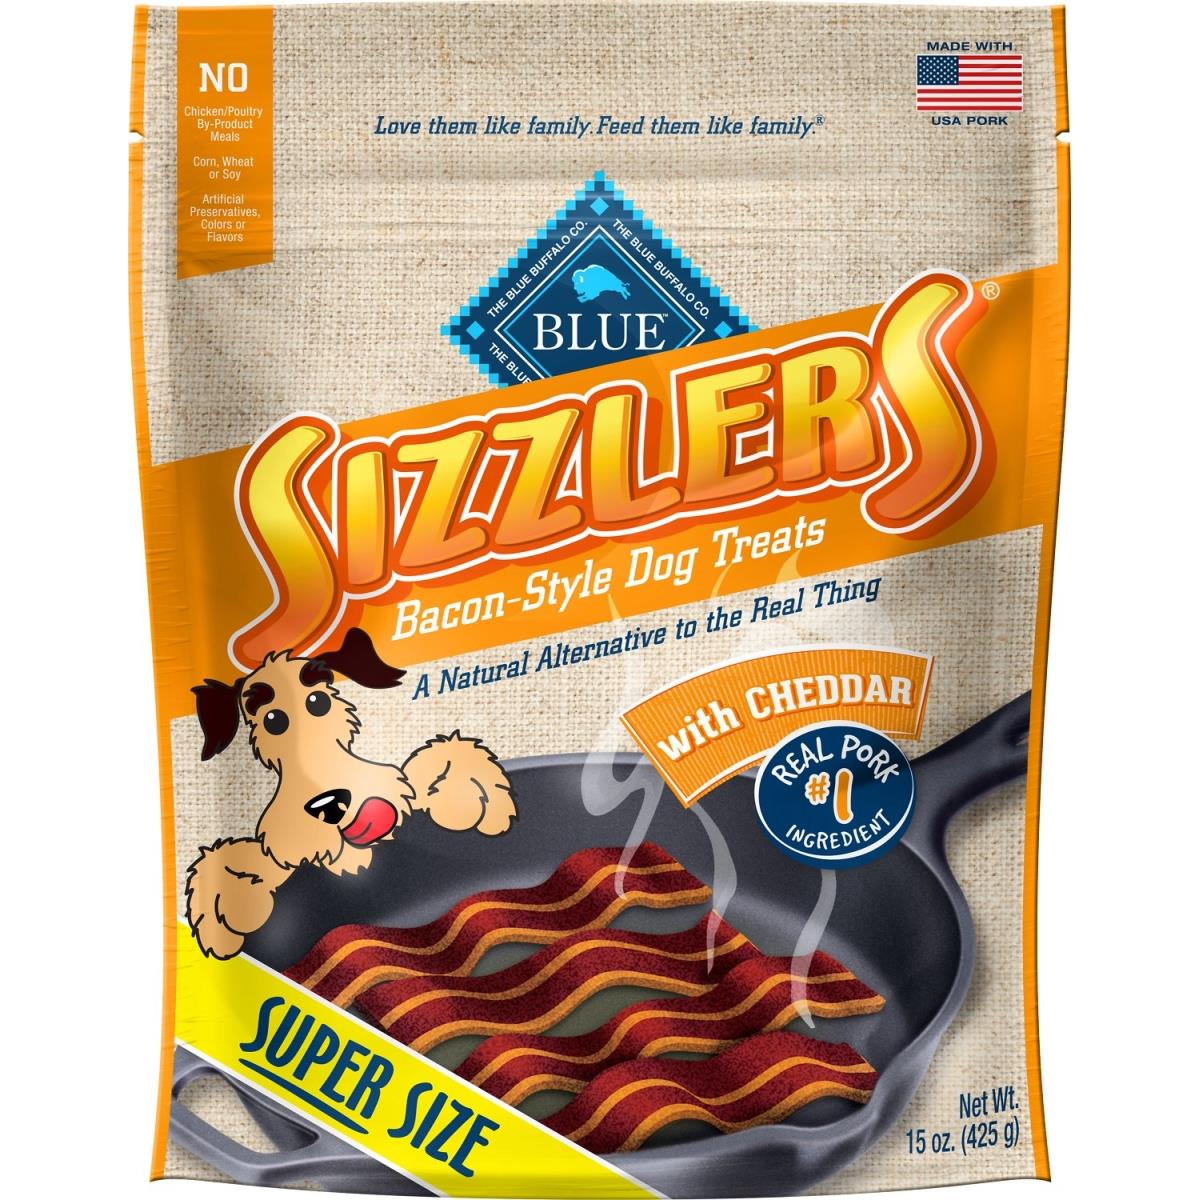 Bb12199 Sizzlers With Cheddar Bacon-style Dog Treats - 15 Oz Bag